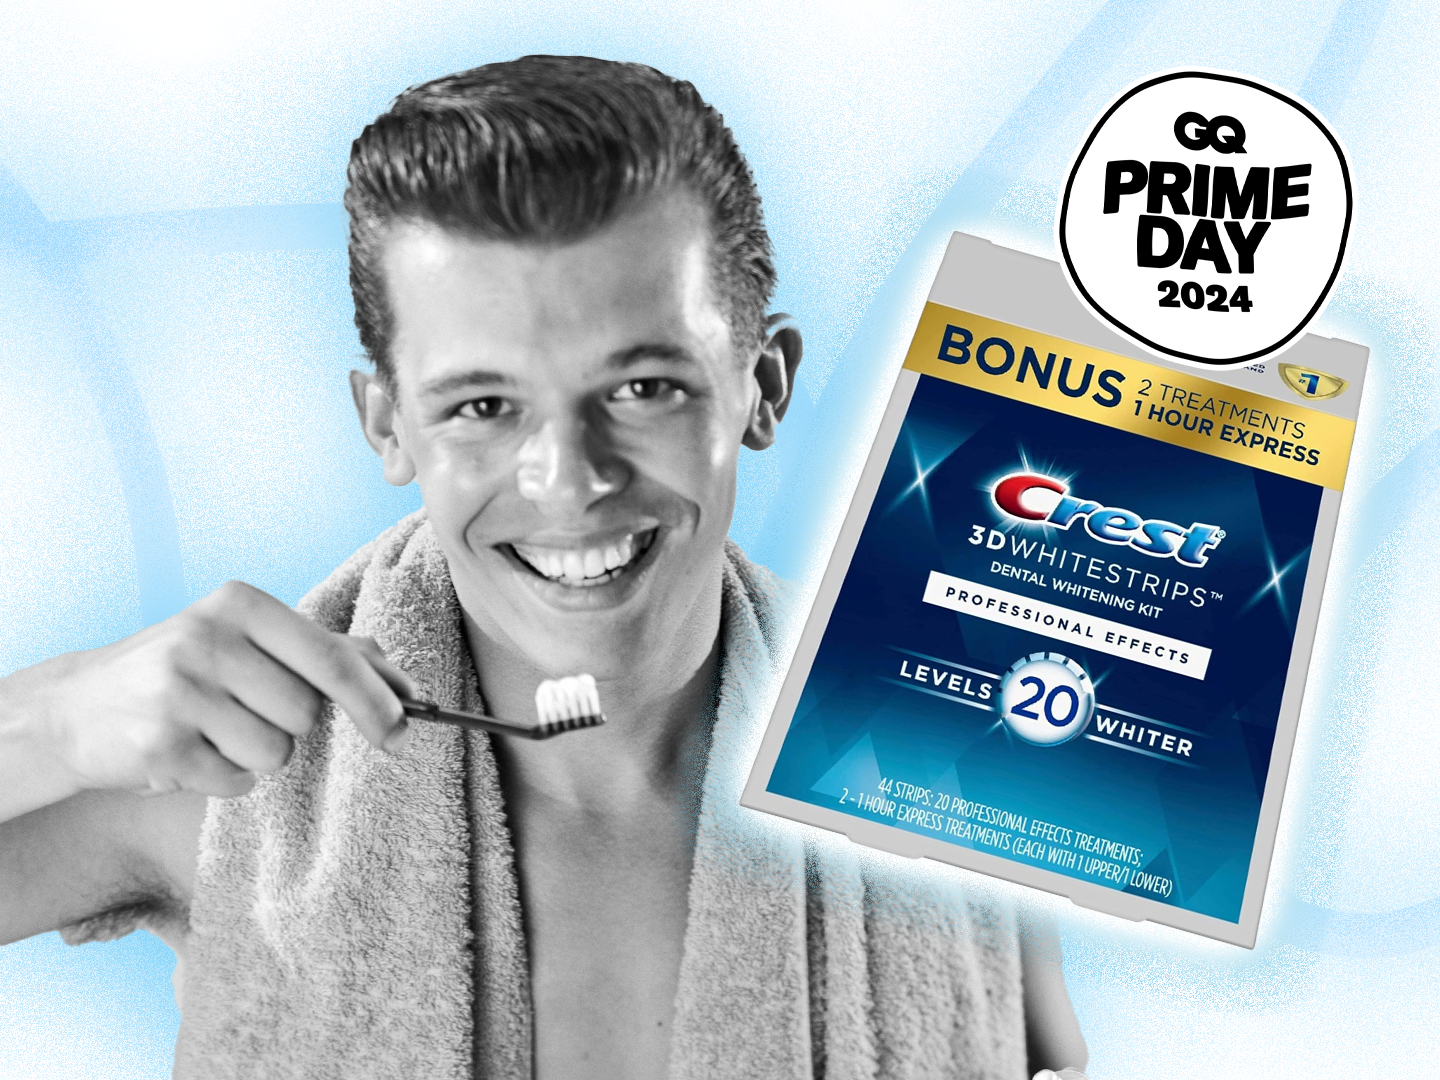 There's Never Been a Better Time to Stock Up on Crest 3D Teeth Whitestrips